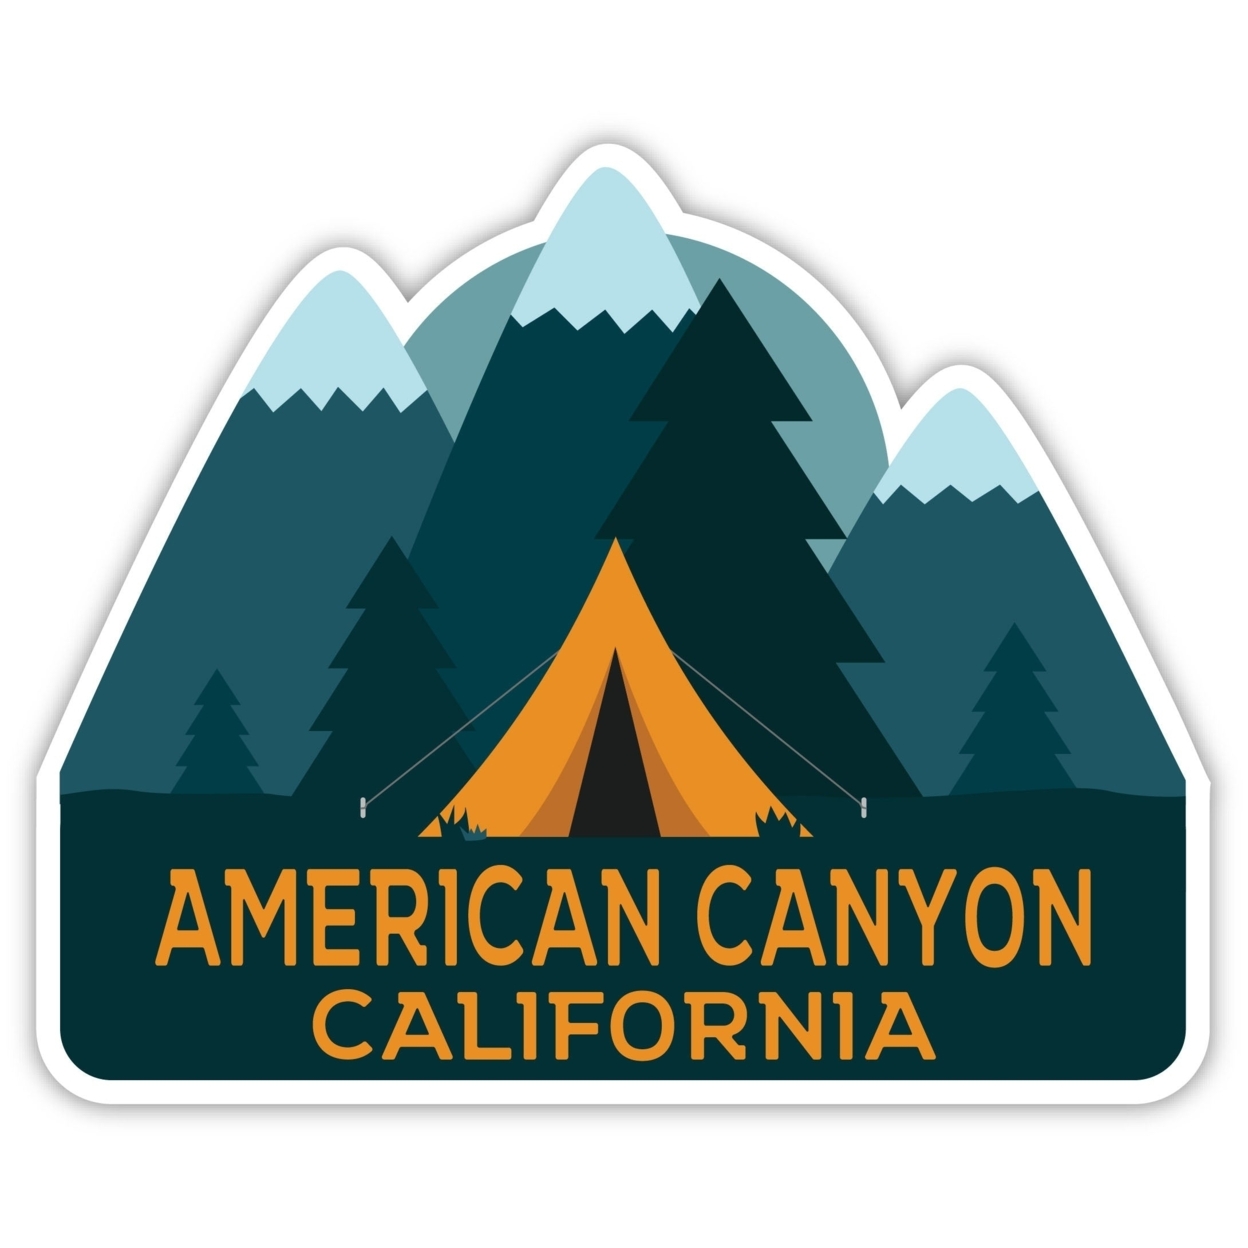 American Canyon California Souvenir Decorative Stickers (Choose Theme And Size) - 4-Pack, 2-Inch, Tent